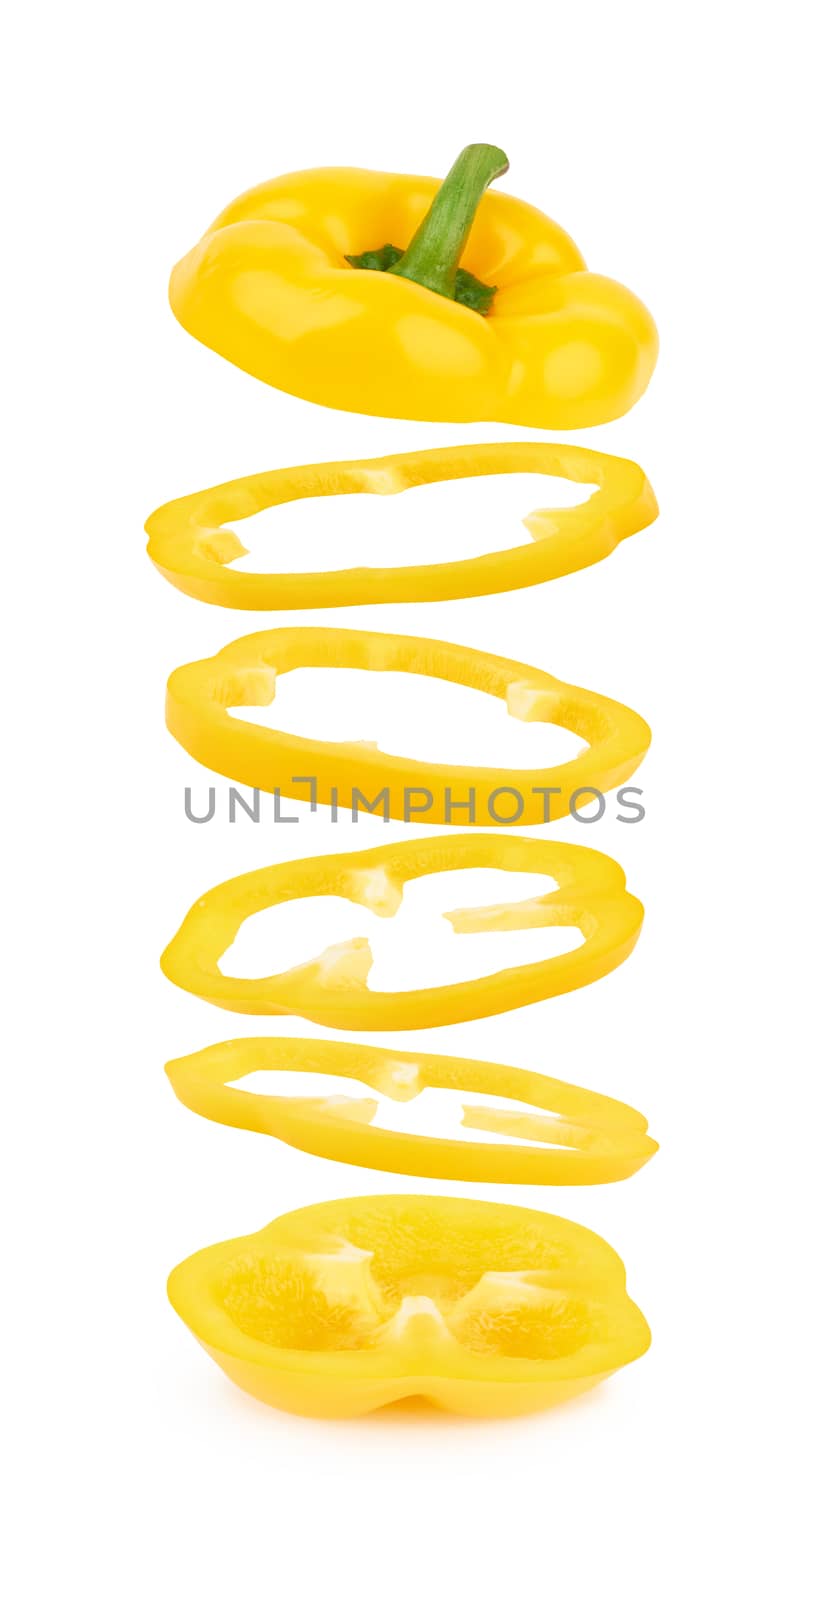 Yellow sweet peppers isolated on white background